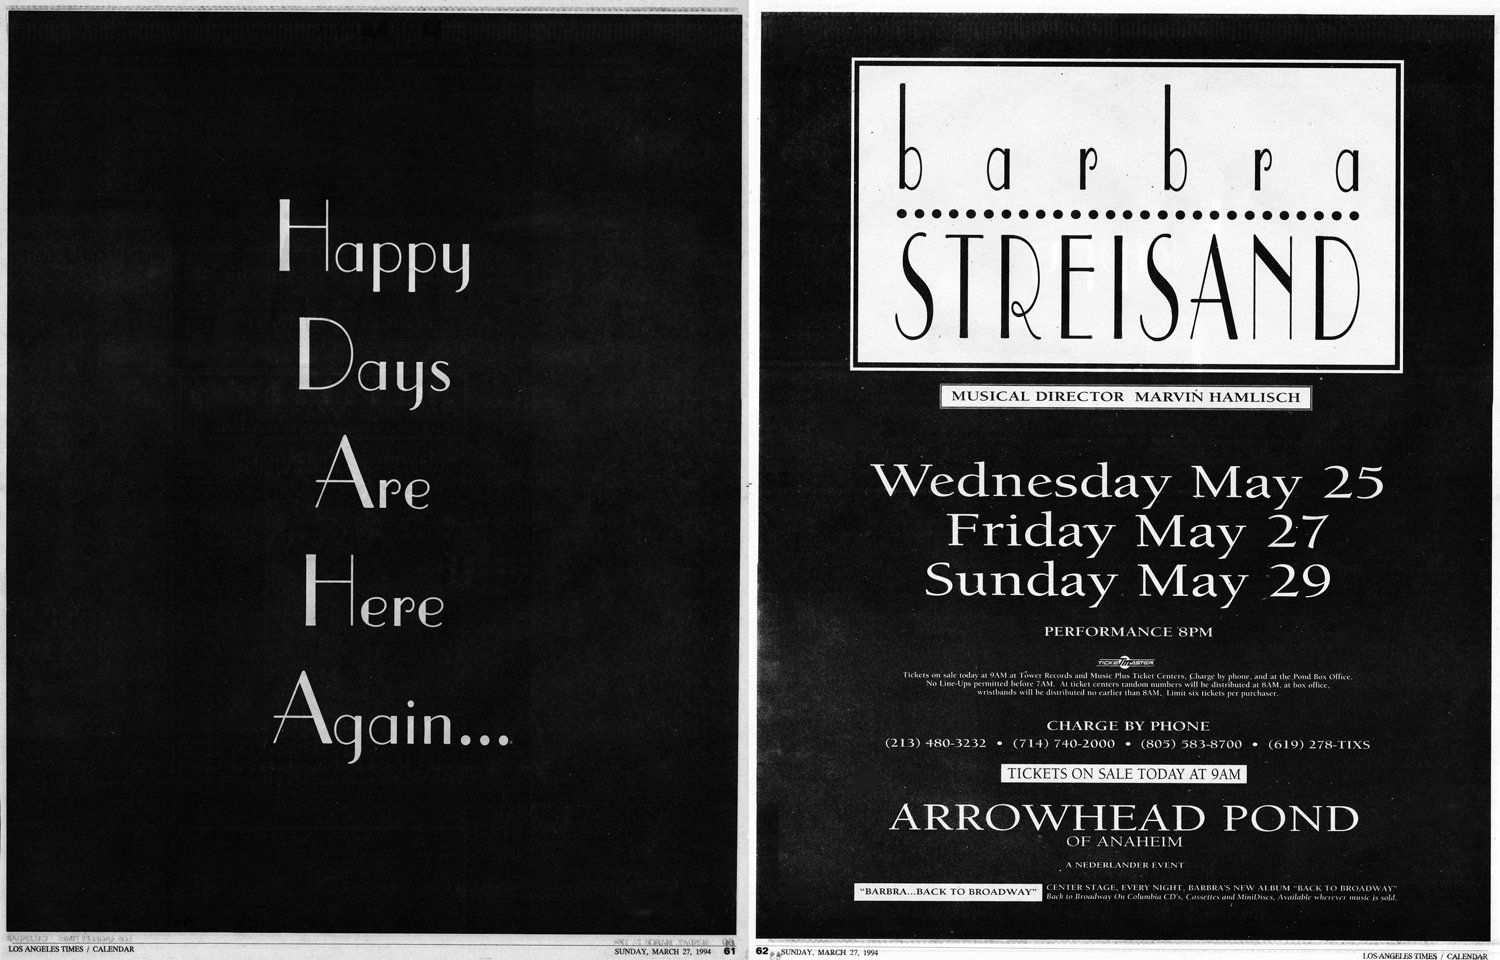 Double truck (two-page) ad for Streisand's original May concerts in Anaheim (Before she had to cancel because of laryngitis).